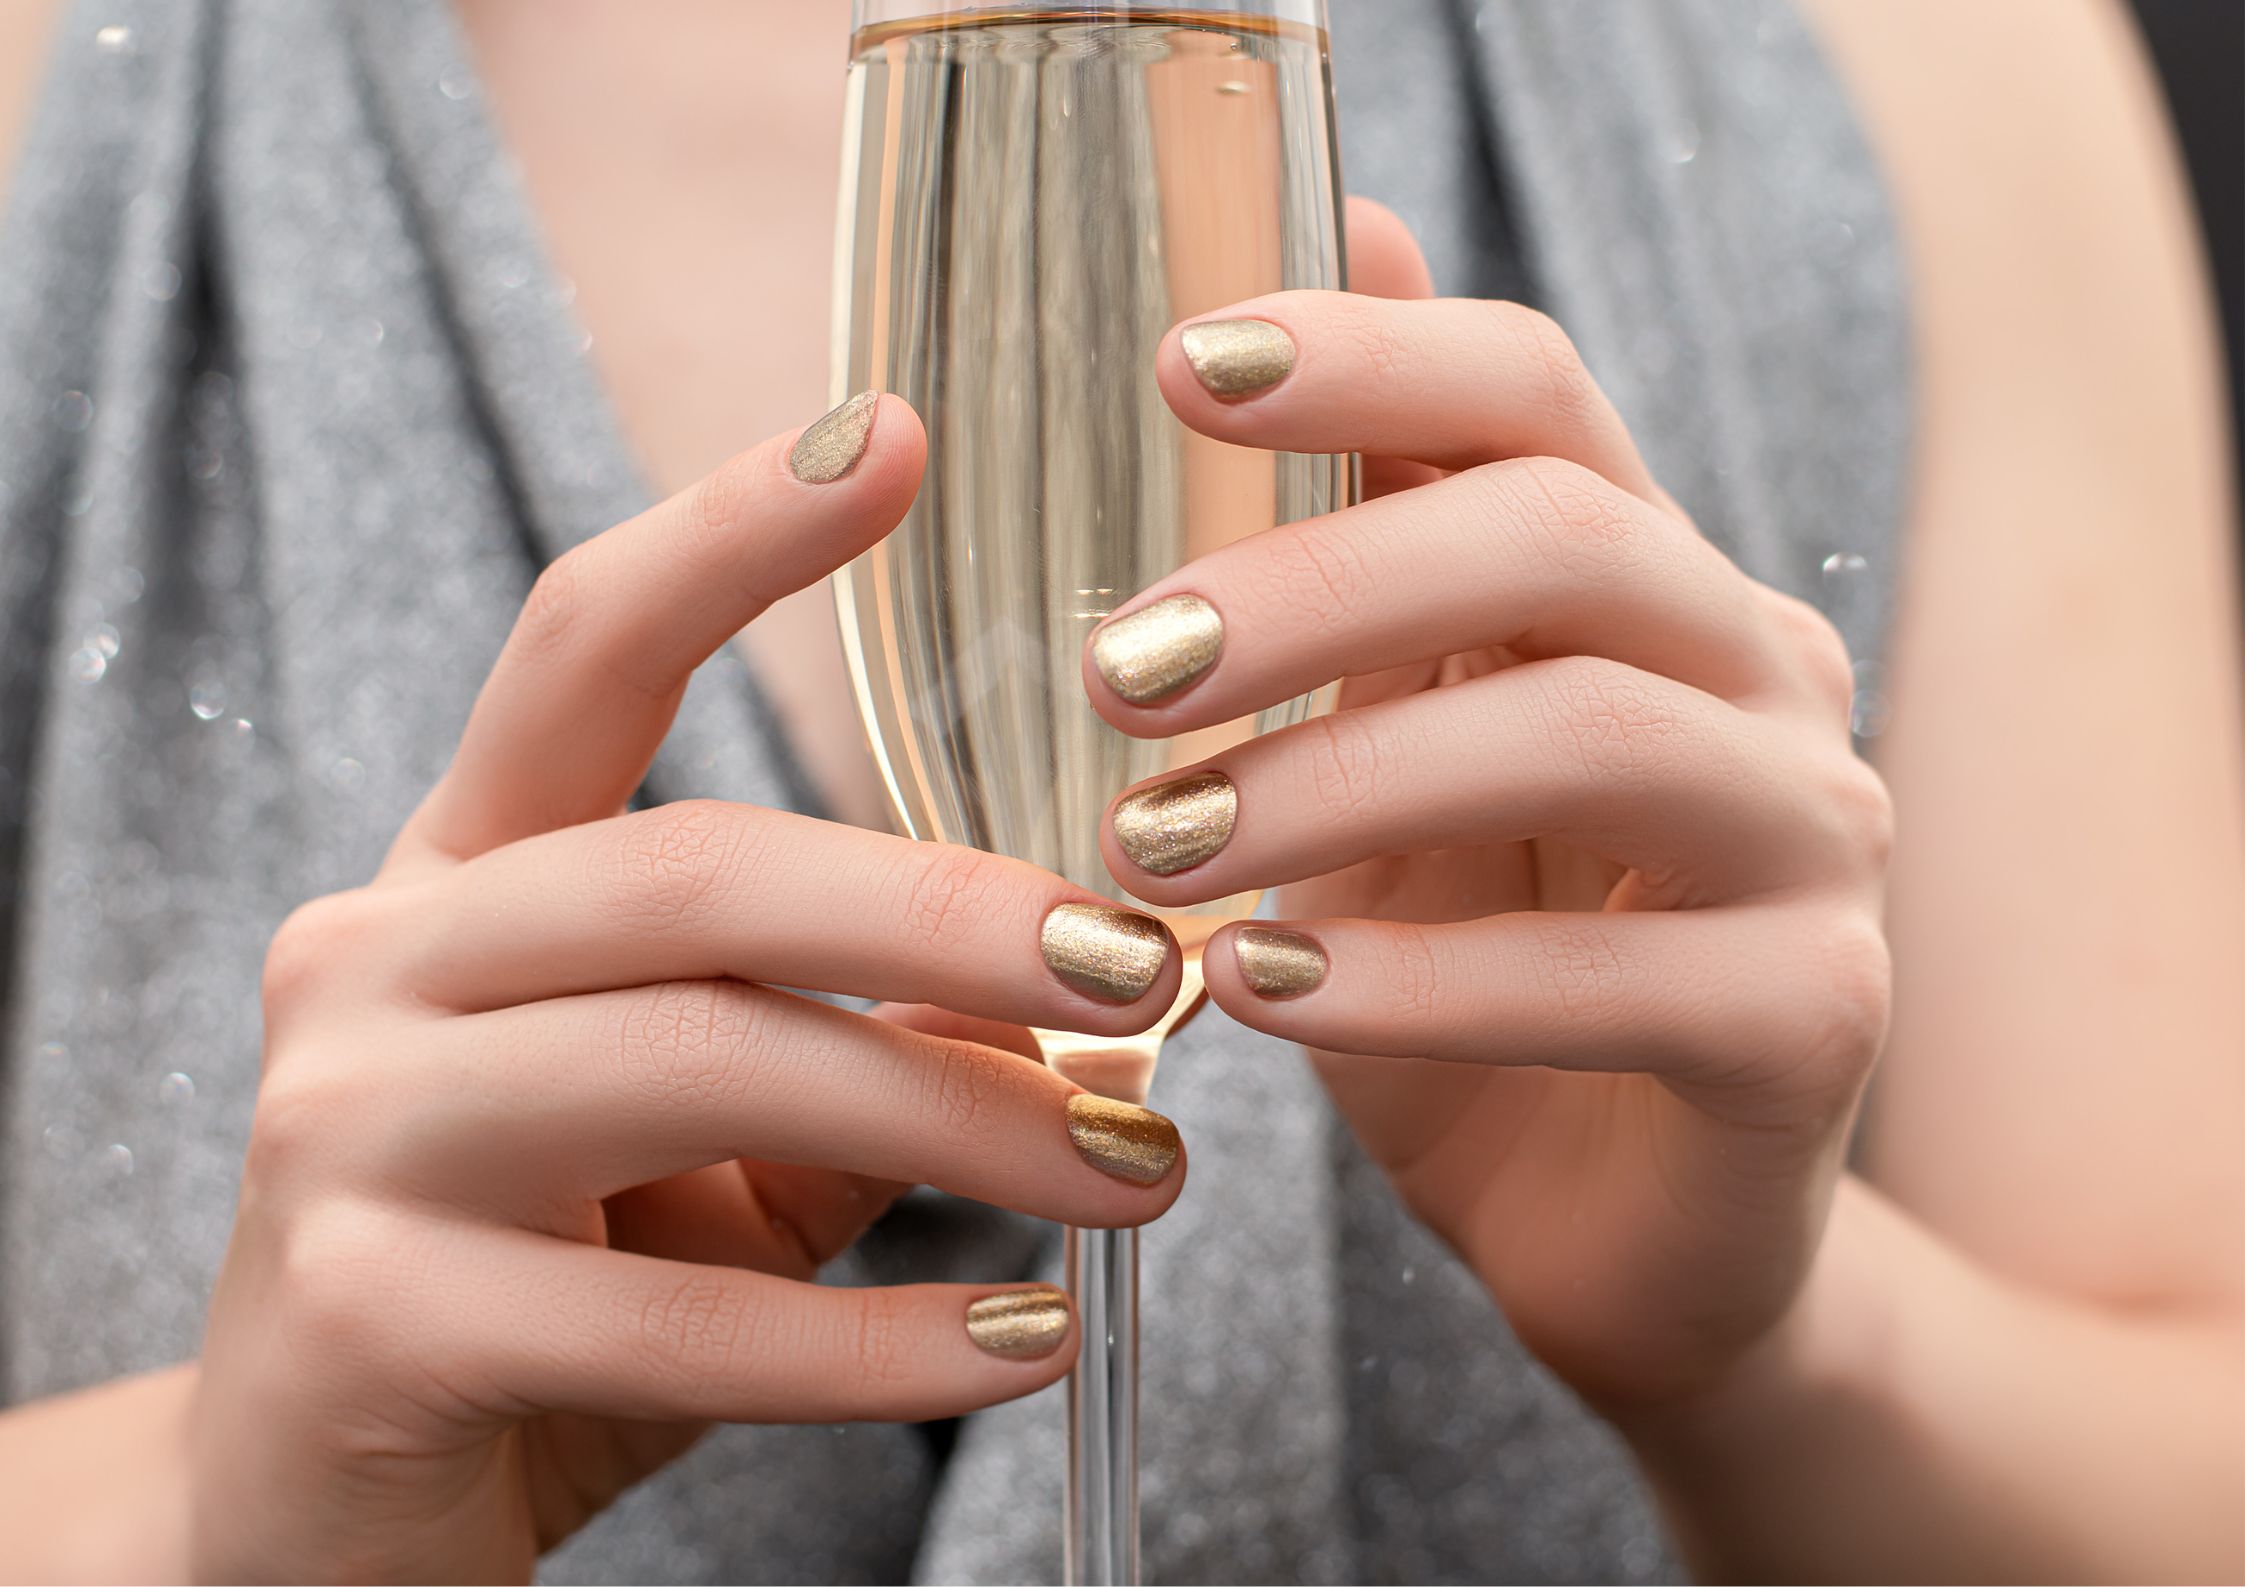 50 Stunning Spring Nails & Nail Art Designs To Try This Year #2020 #acrylic  #art #colors #design #easy #f… | Unghie idee, Unghie estive, Unghie  semplici ed eleganti